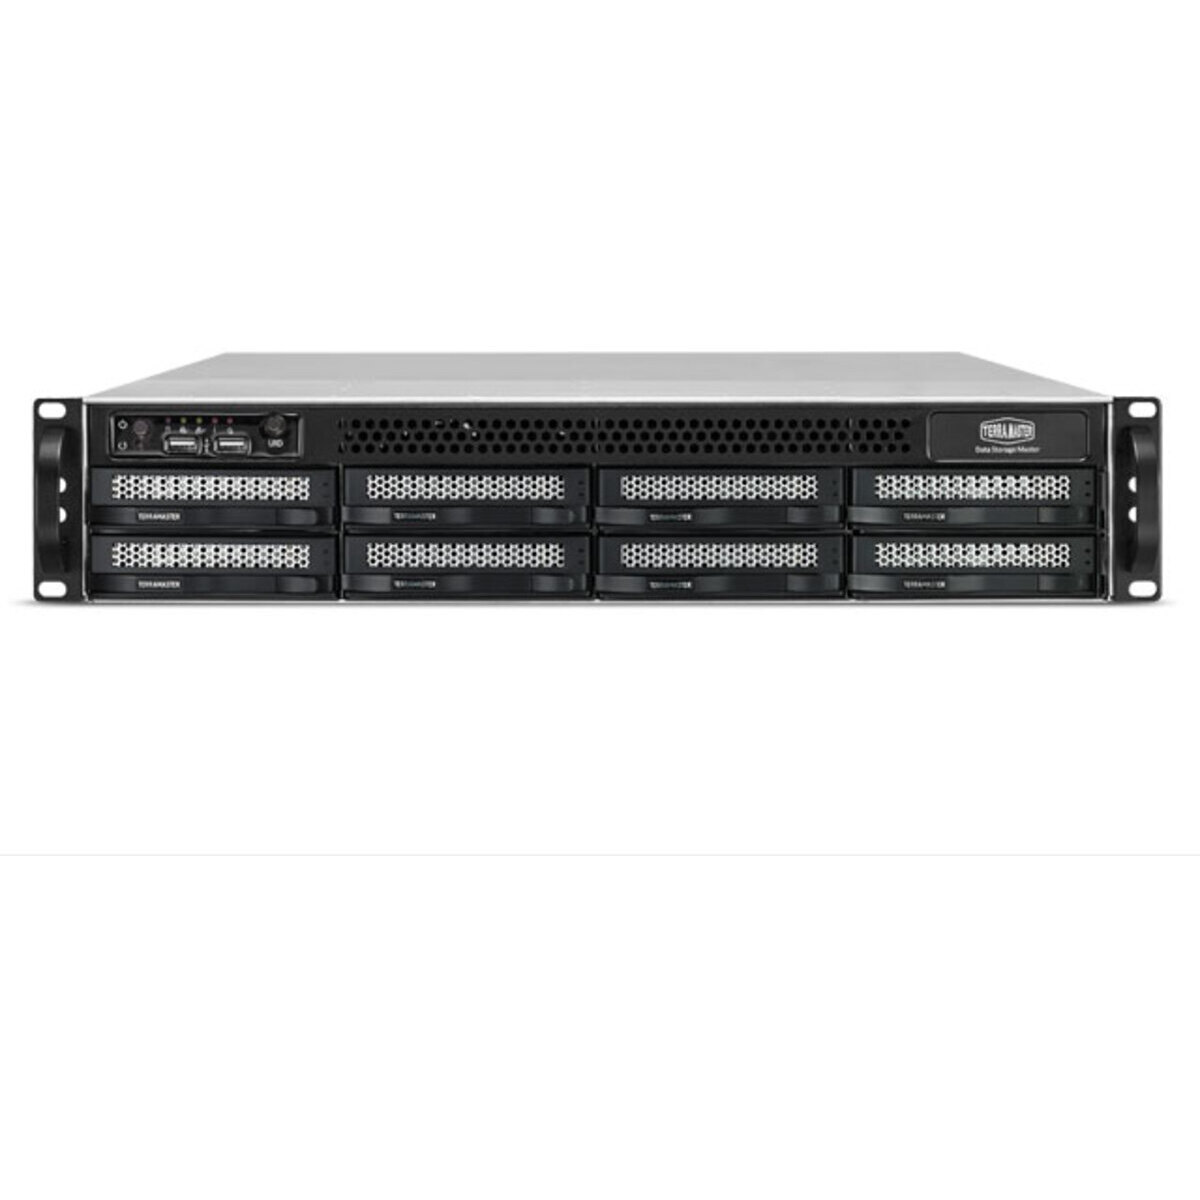 TerraMaster U8-722-2224 24tb 8-Bay RackMount Large Business / Enterprise NAS - Network Attached Storage Device 6x4tb Crucial MX500 CT4000MX500SSD1 2.5 560/510MB/s SATA 6Gb/s SSD CONSUMER Class Drives Installed - Burn-In Tested U8-722-2224